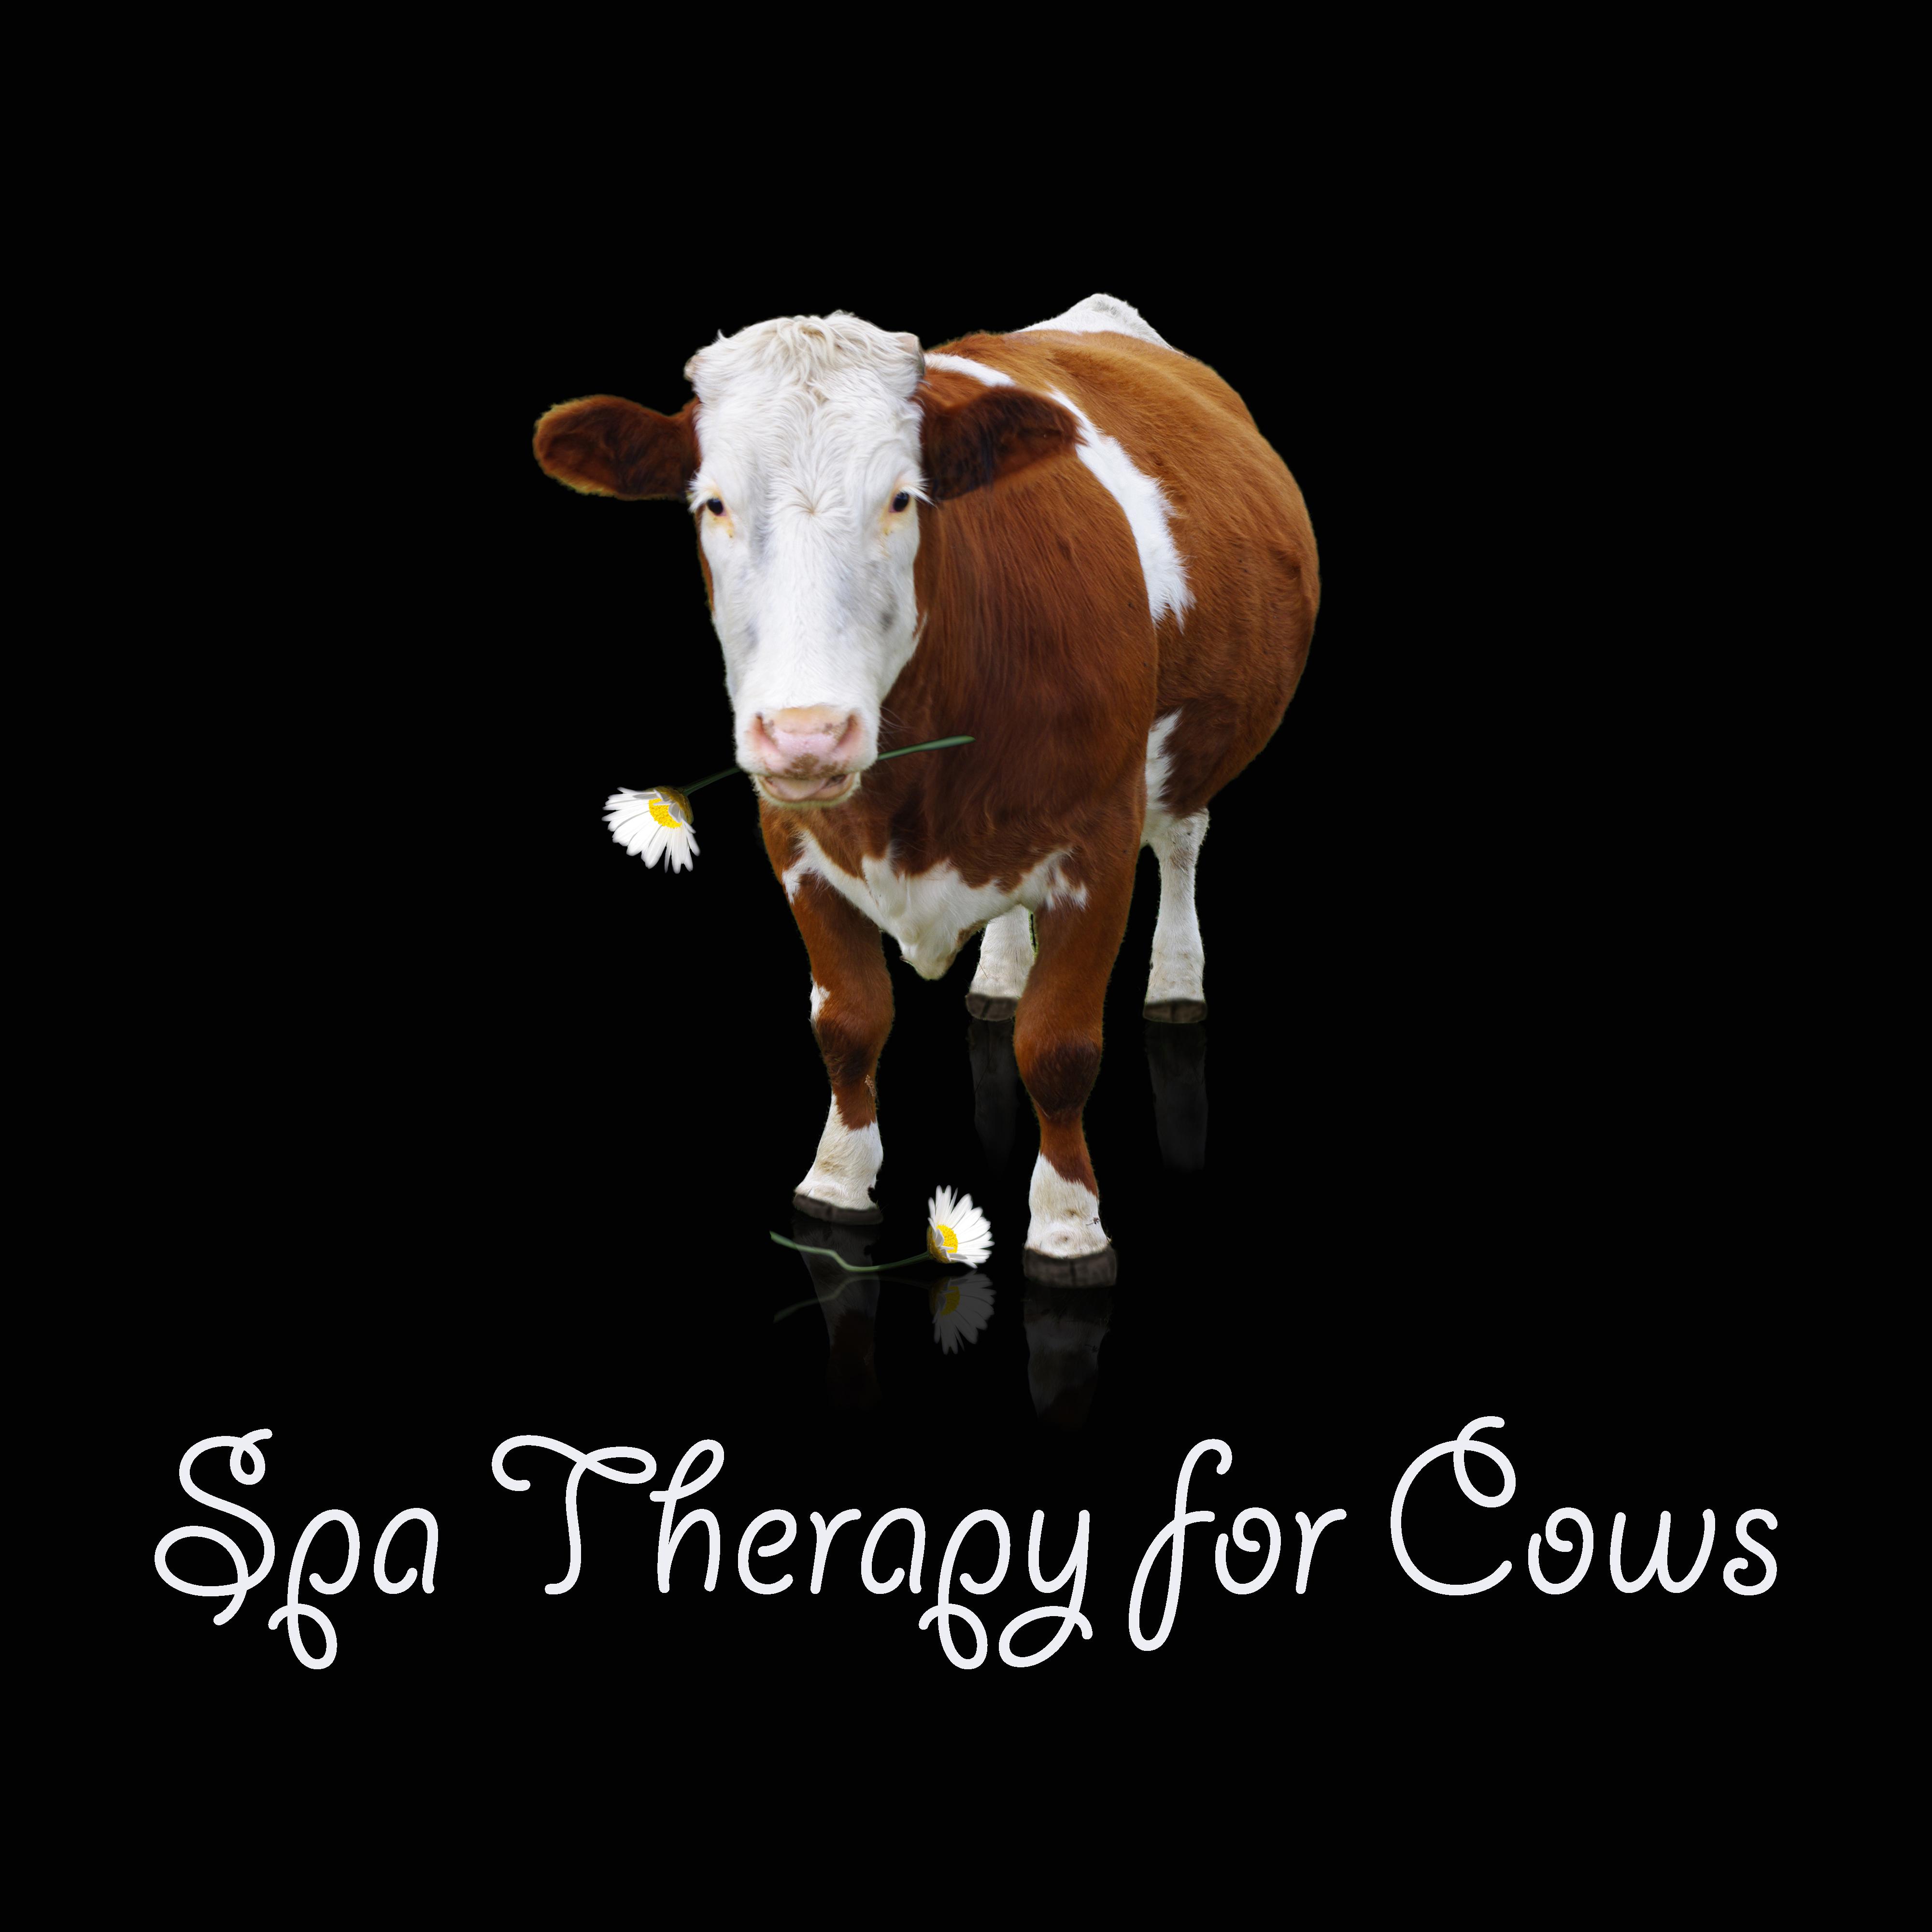 Spa Therapy for Cows